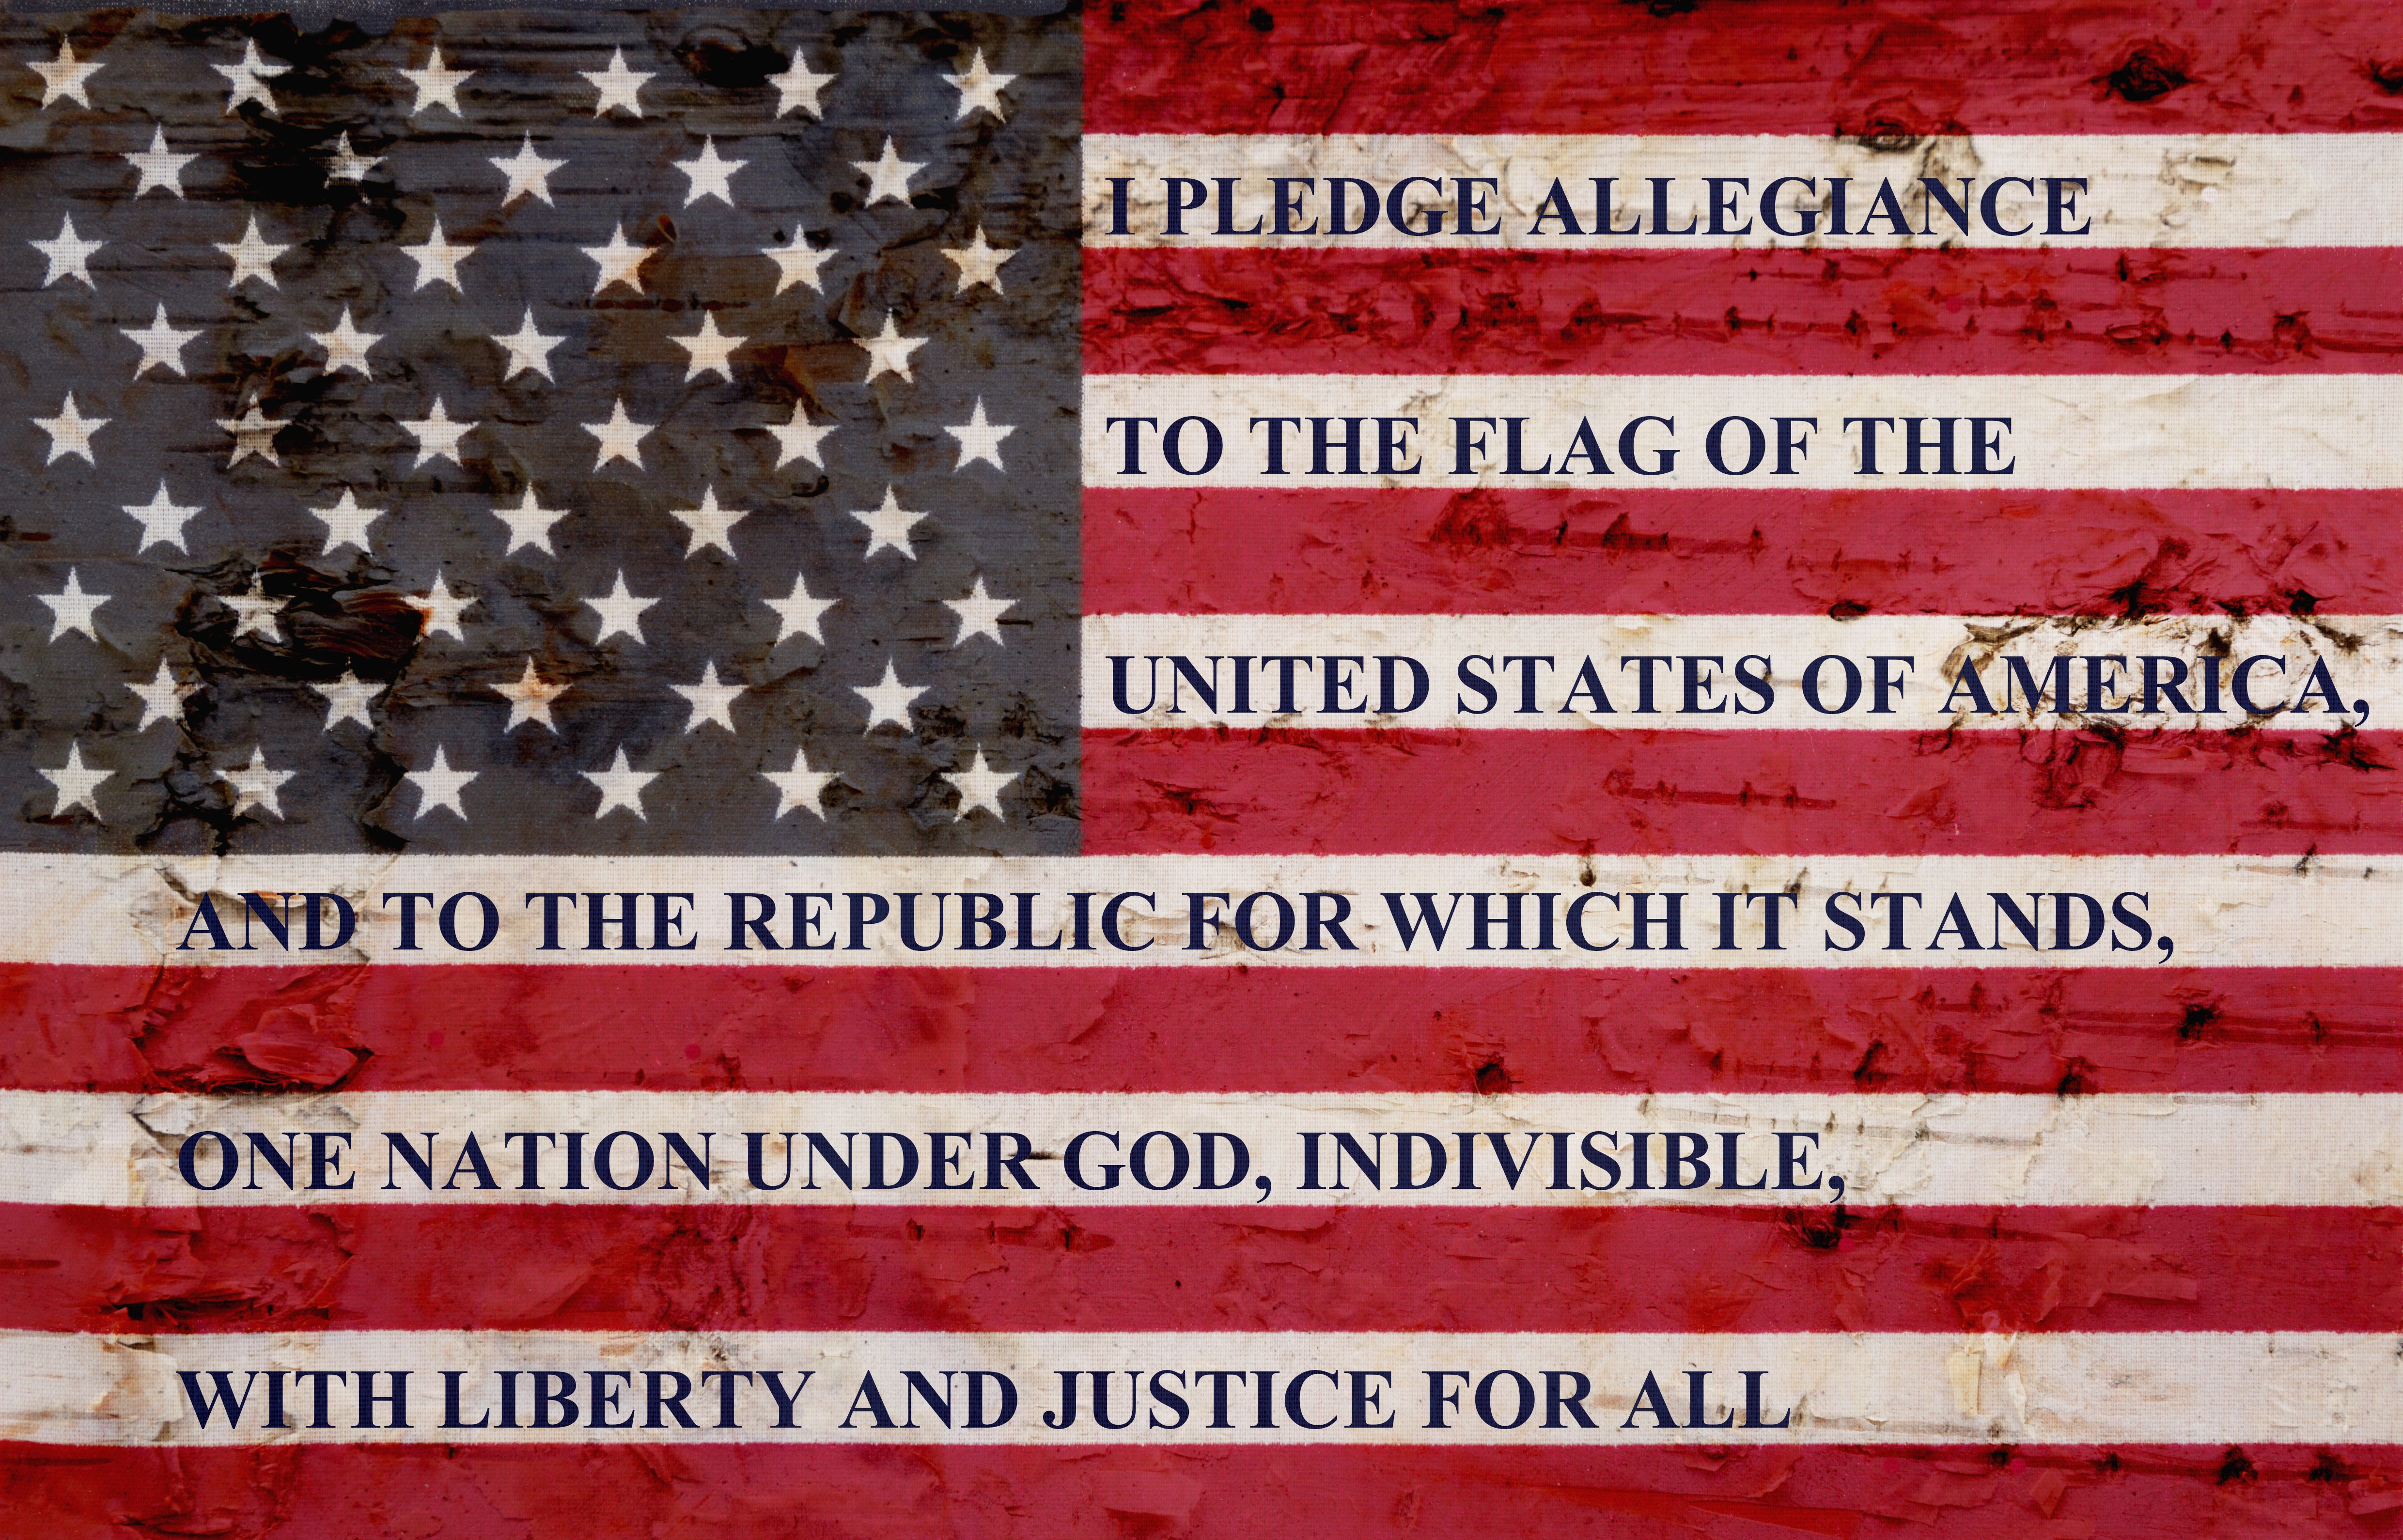 About The Pledge of Allegiance